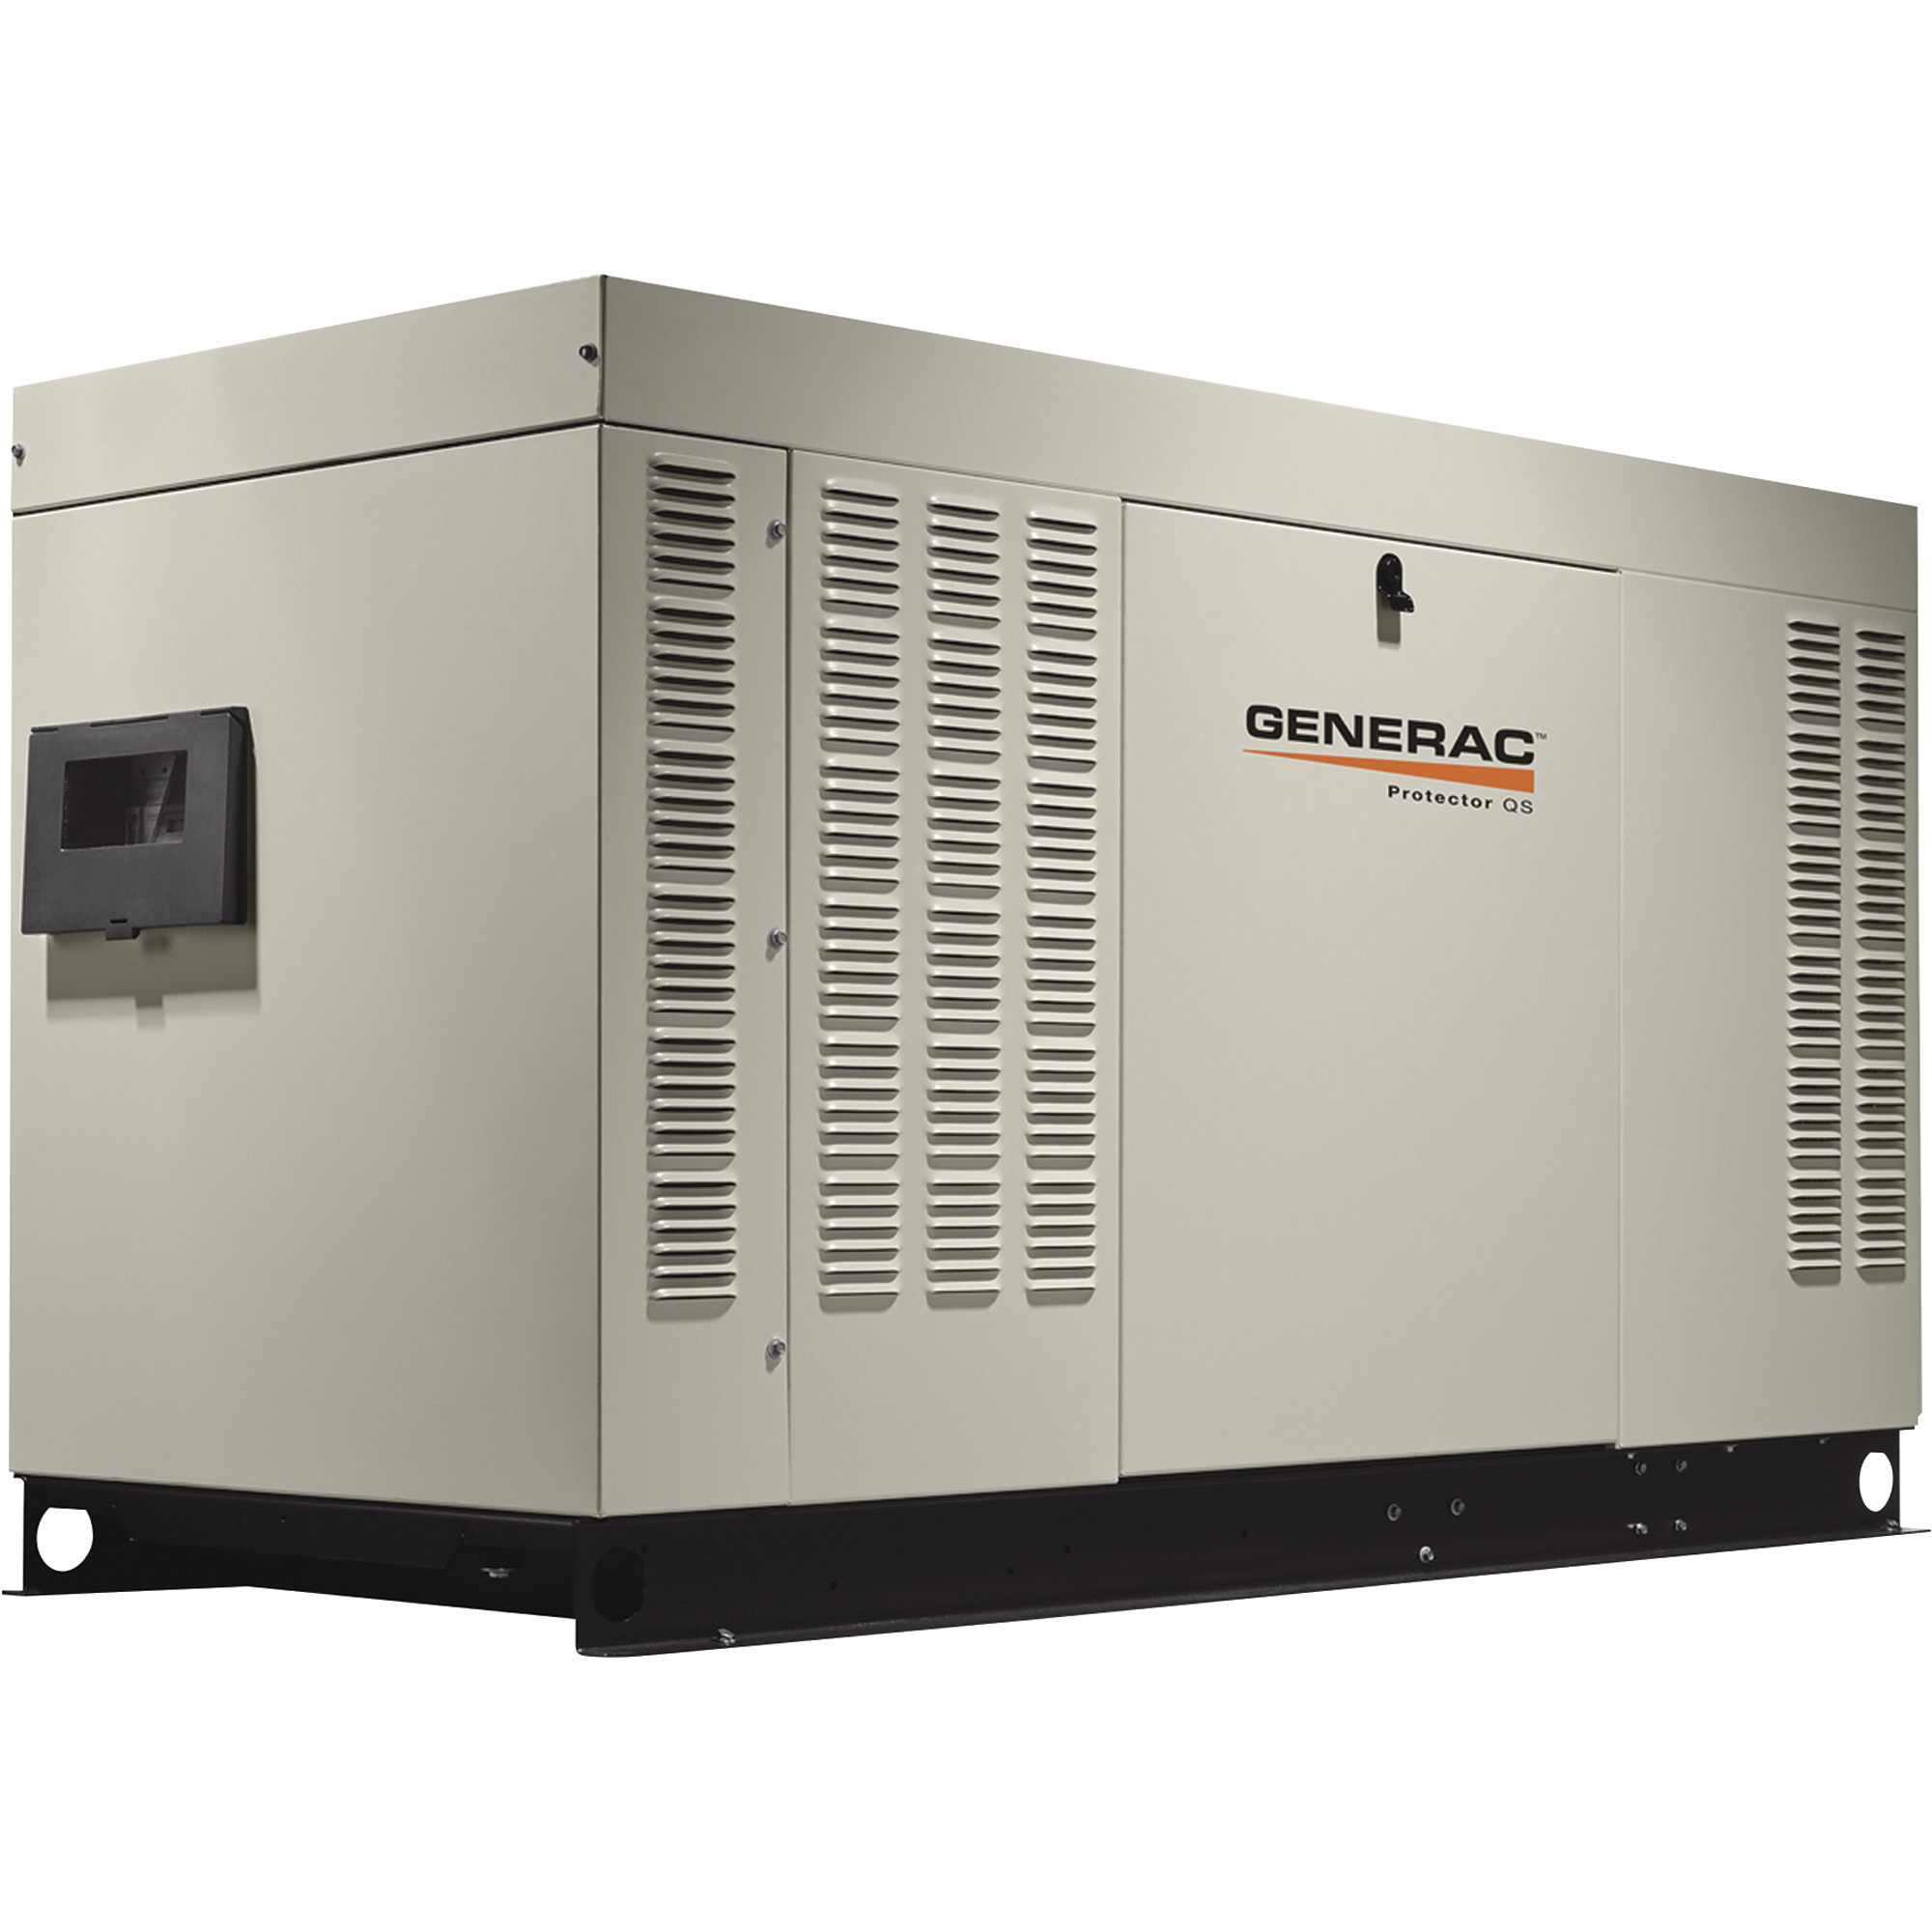 Generac QuietSource Series Liquid-Cooled Home Standby Generator, 48kW (LP)/48kW NG, Model RG04845ANAX